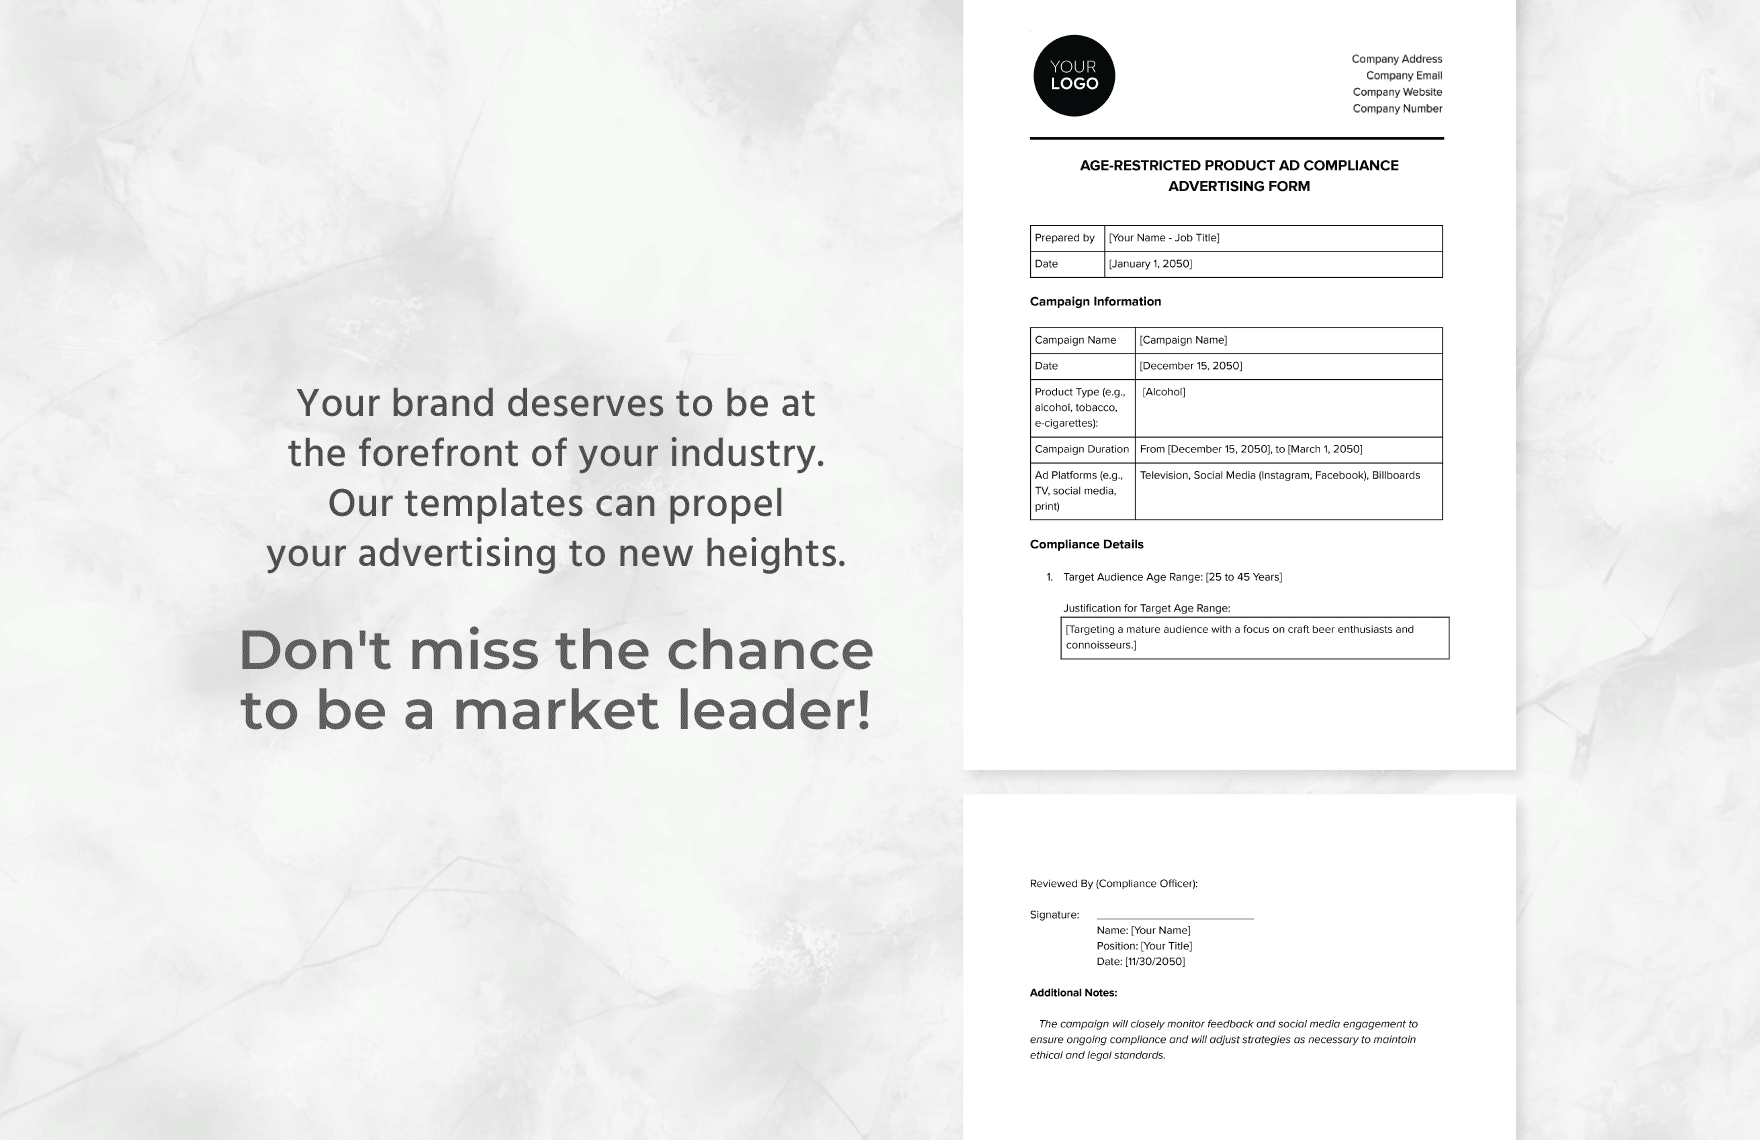 Age-Restricted Product Ad Compliance Advertising Form Template